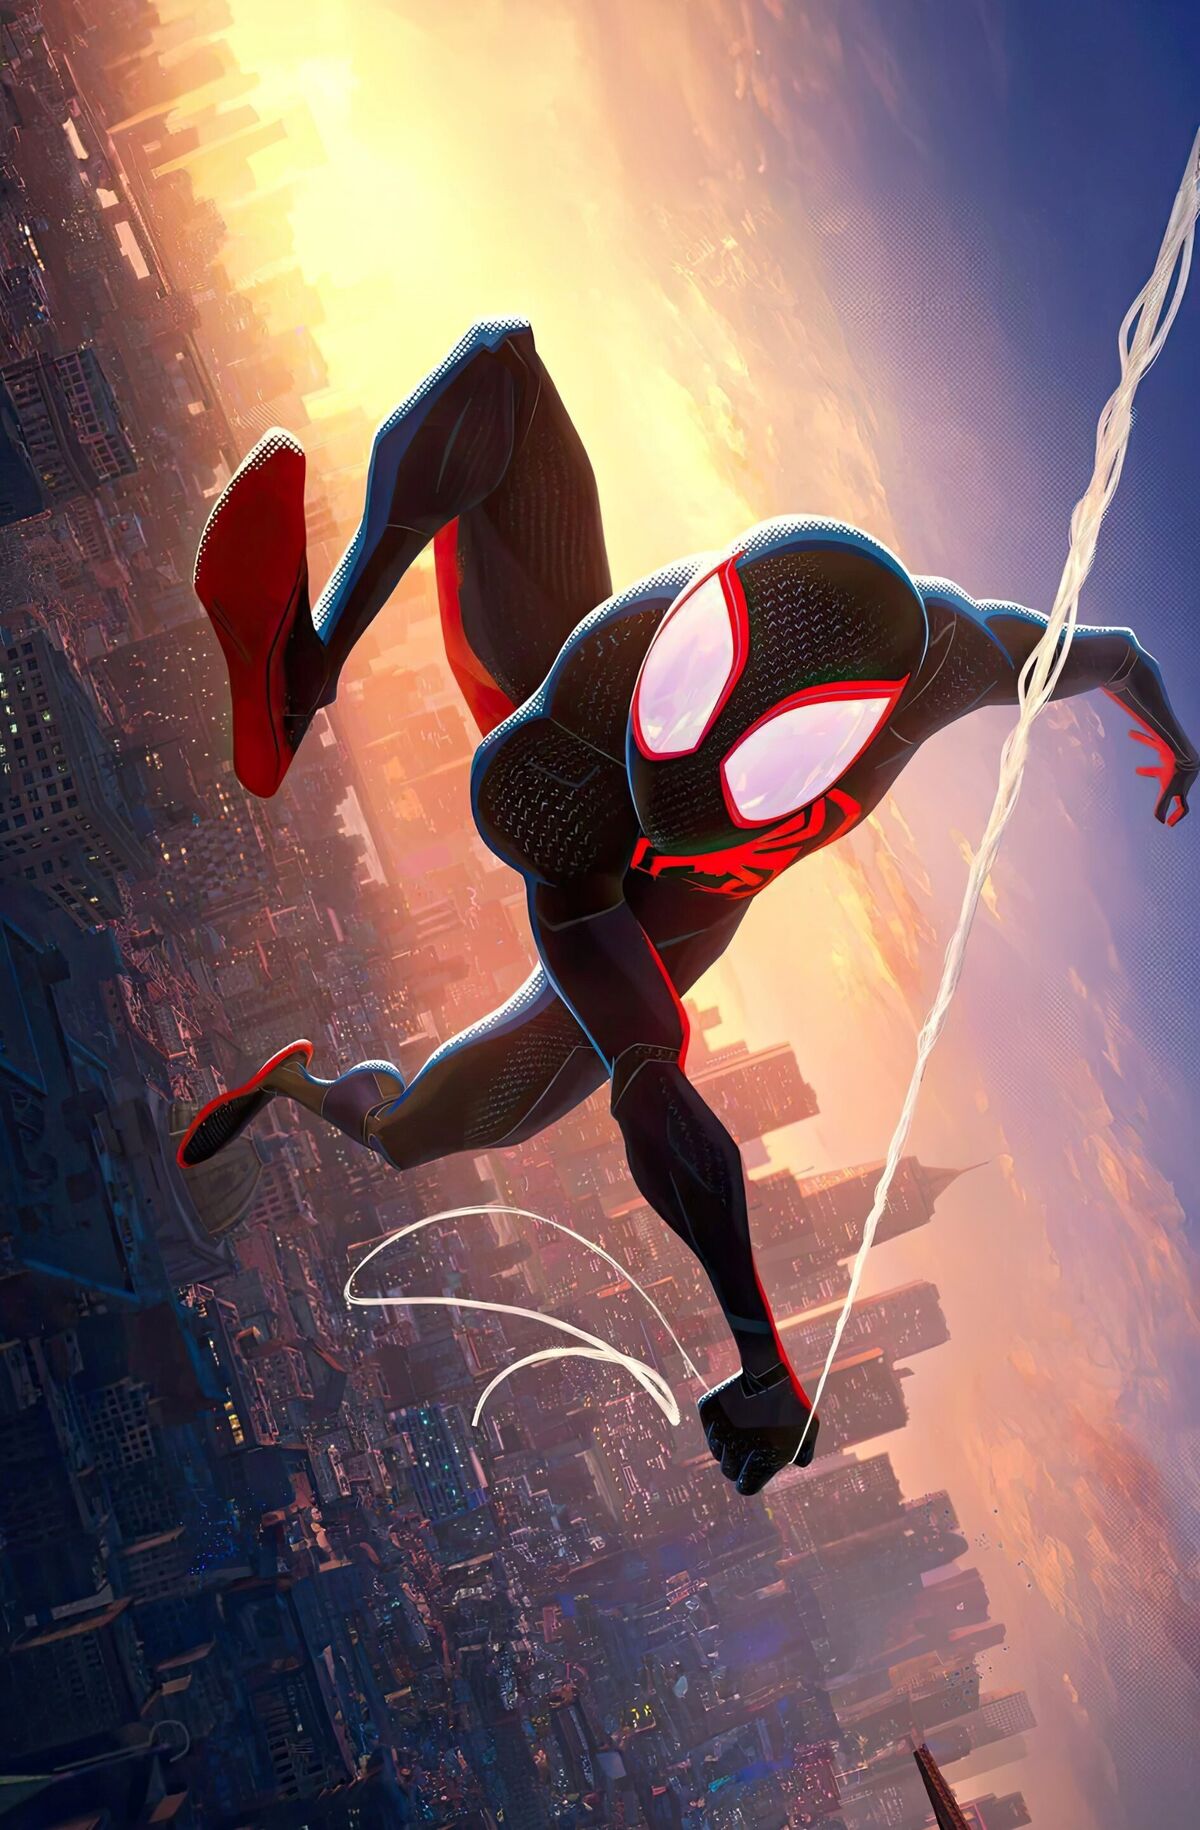 Marvel Spider-Man: Across the Spider-Verse - Trio Wall Poster